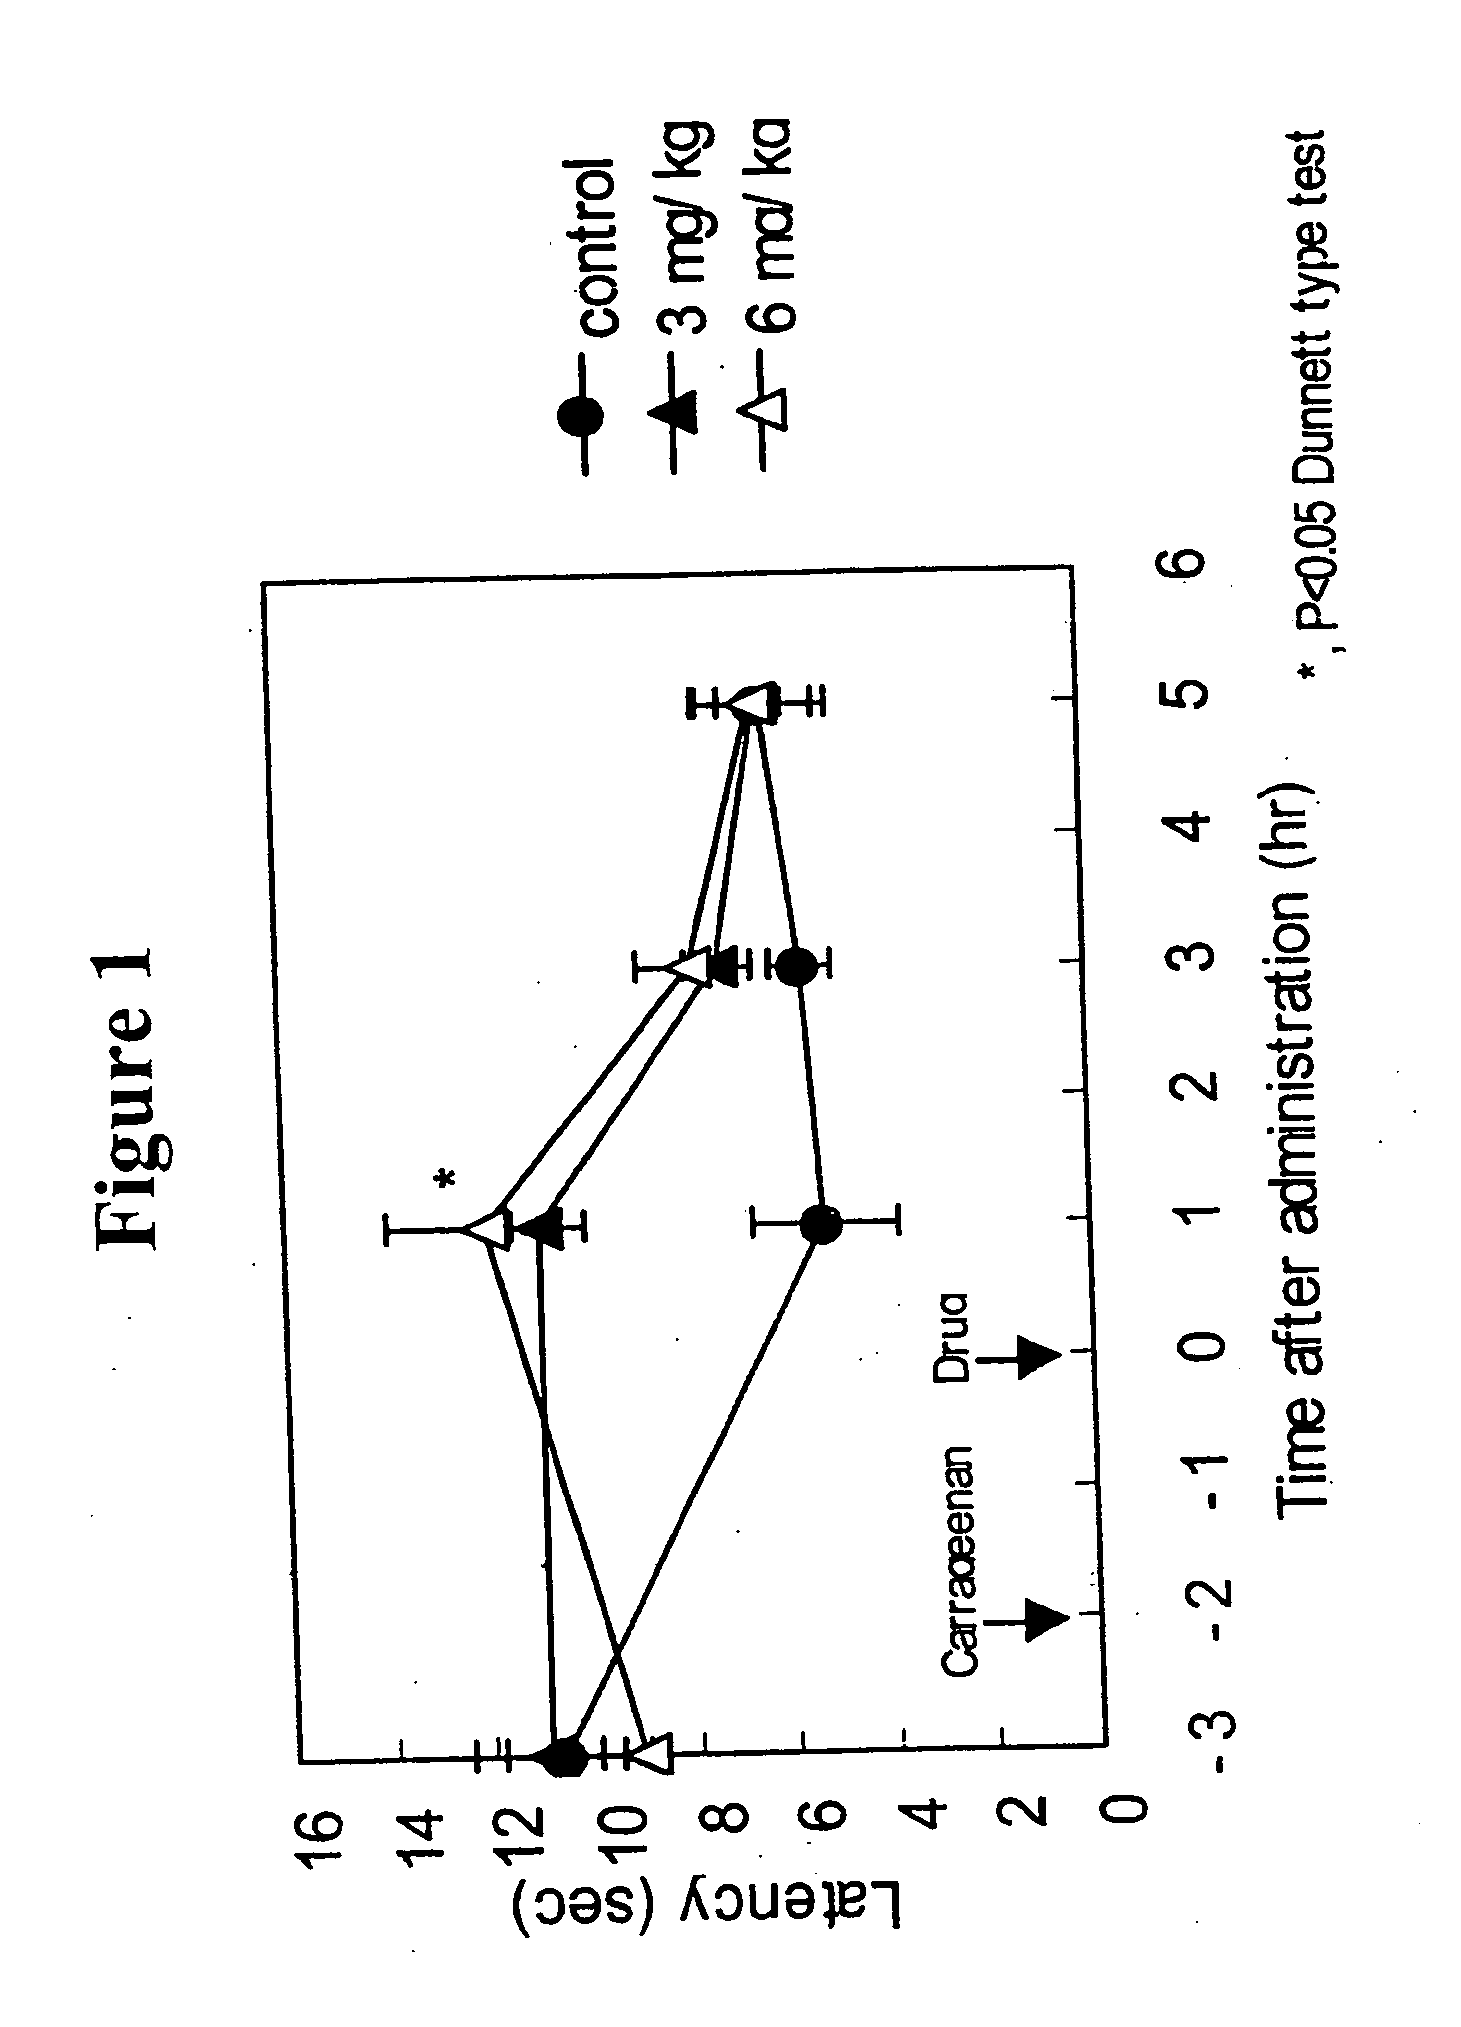 Dihydropyridine compounds and compositions for headaches